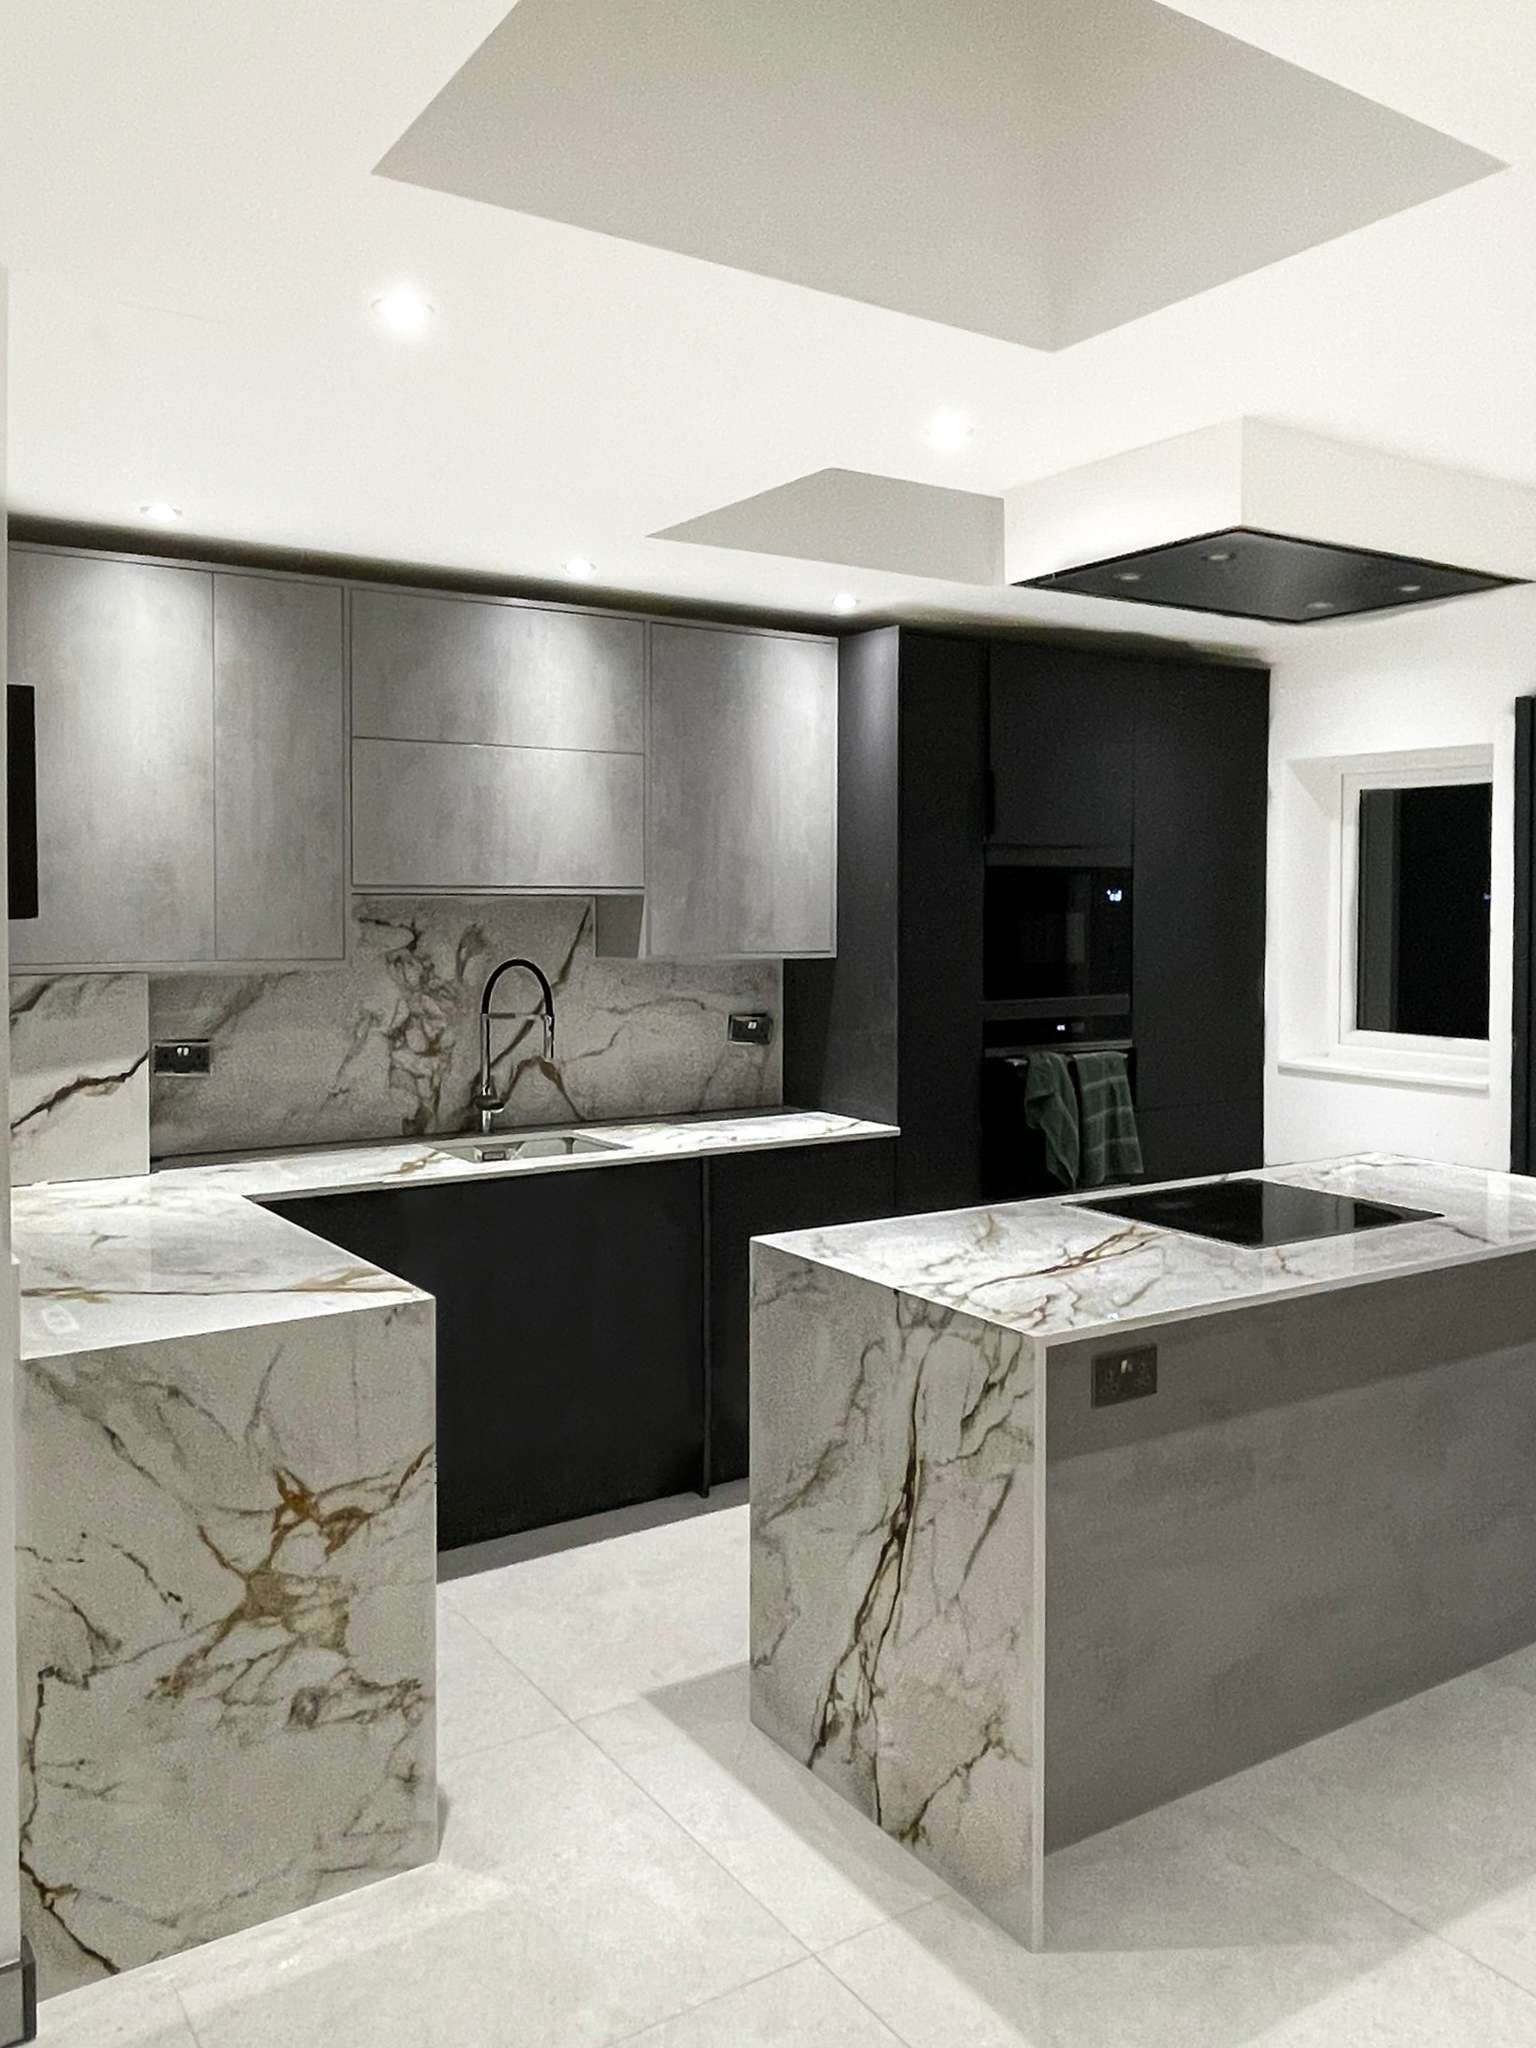 JR Stone: Revolutionizing Countertops with Safety and Sustainability